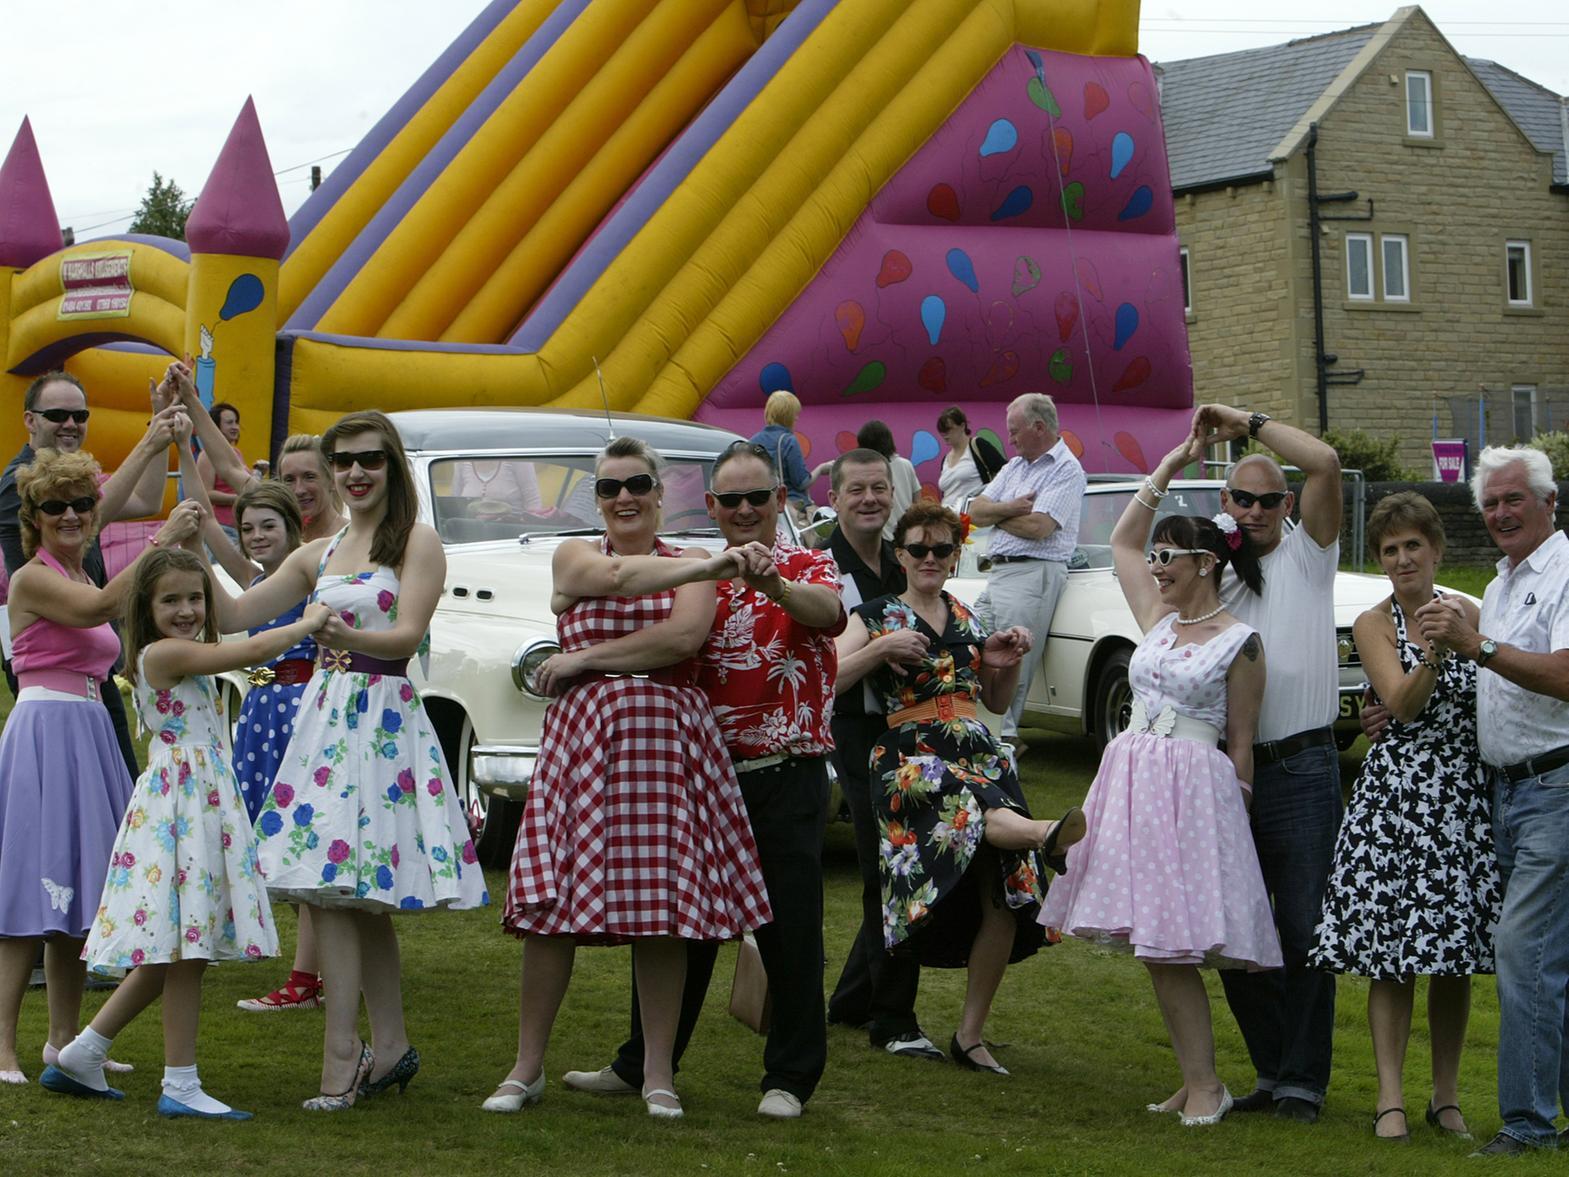 This picture from back in 2010 shows all the fun of the fair at Elland Carnival.